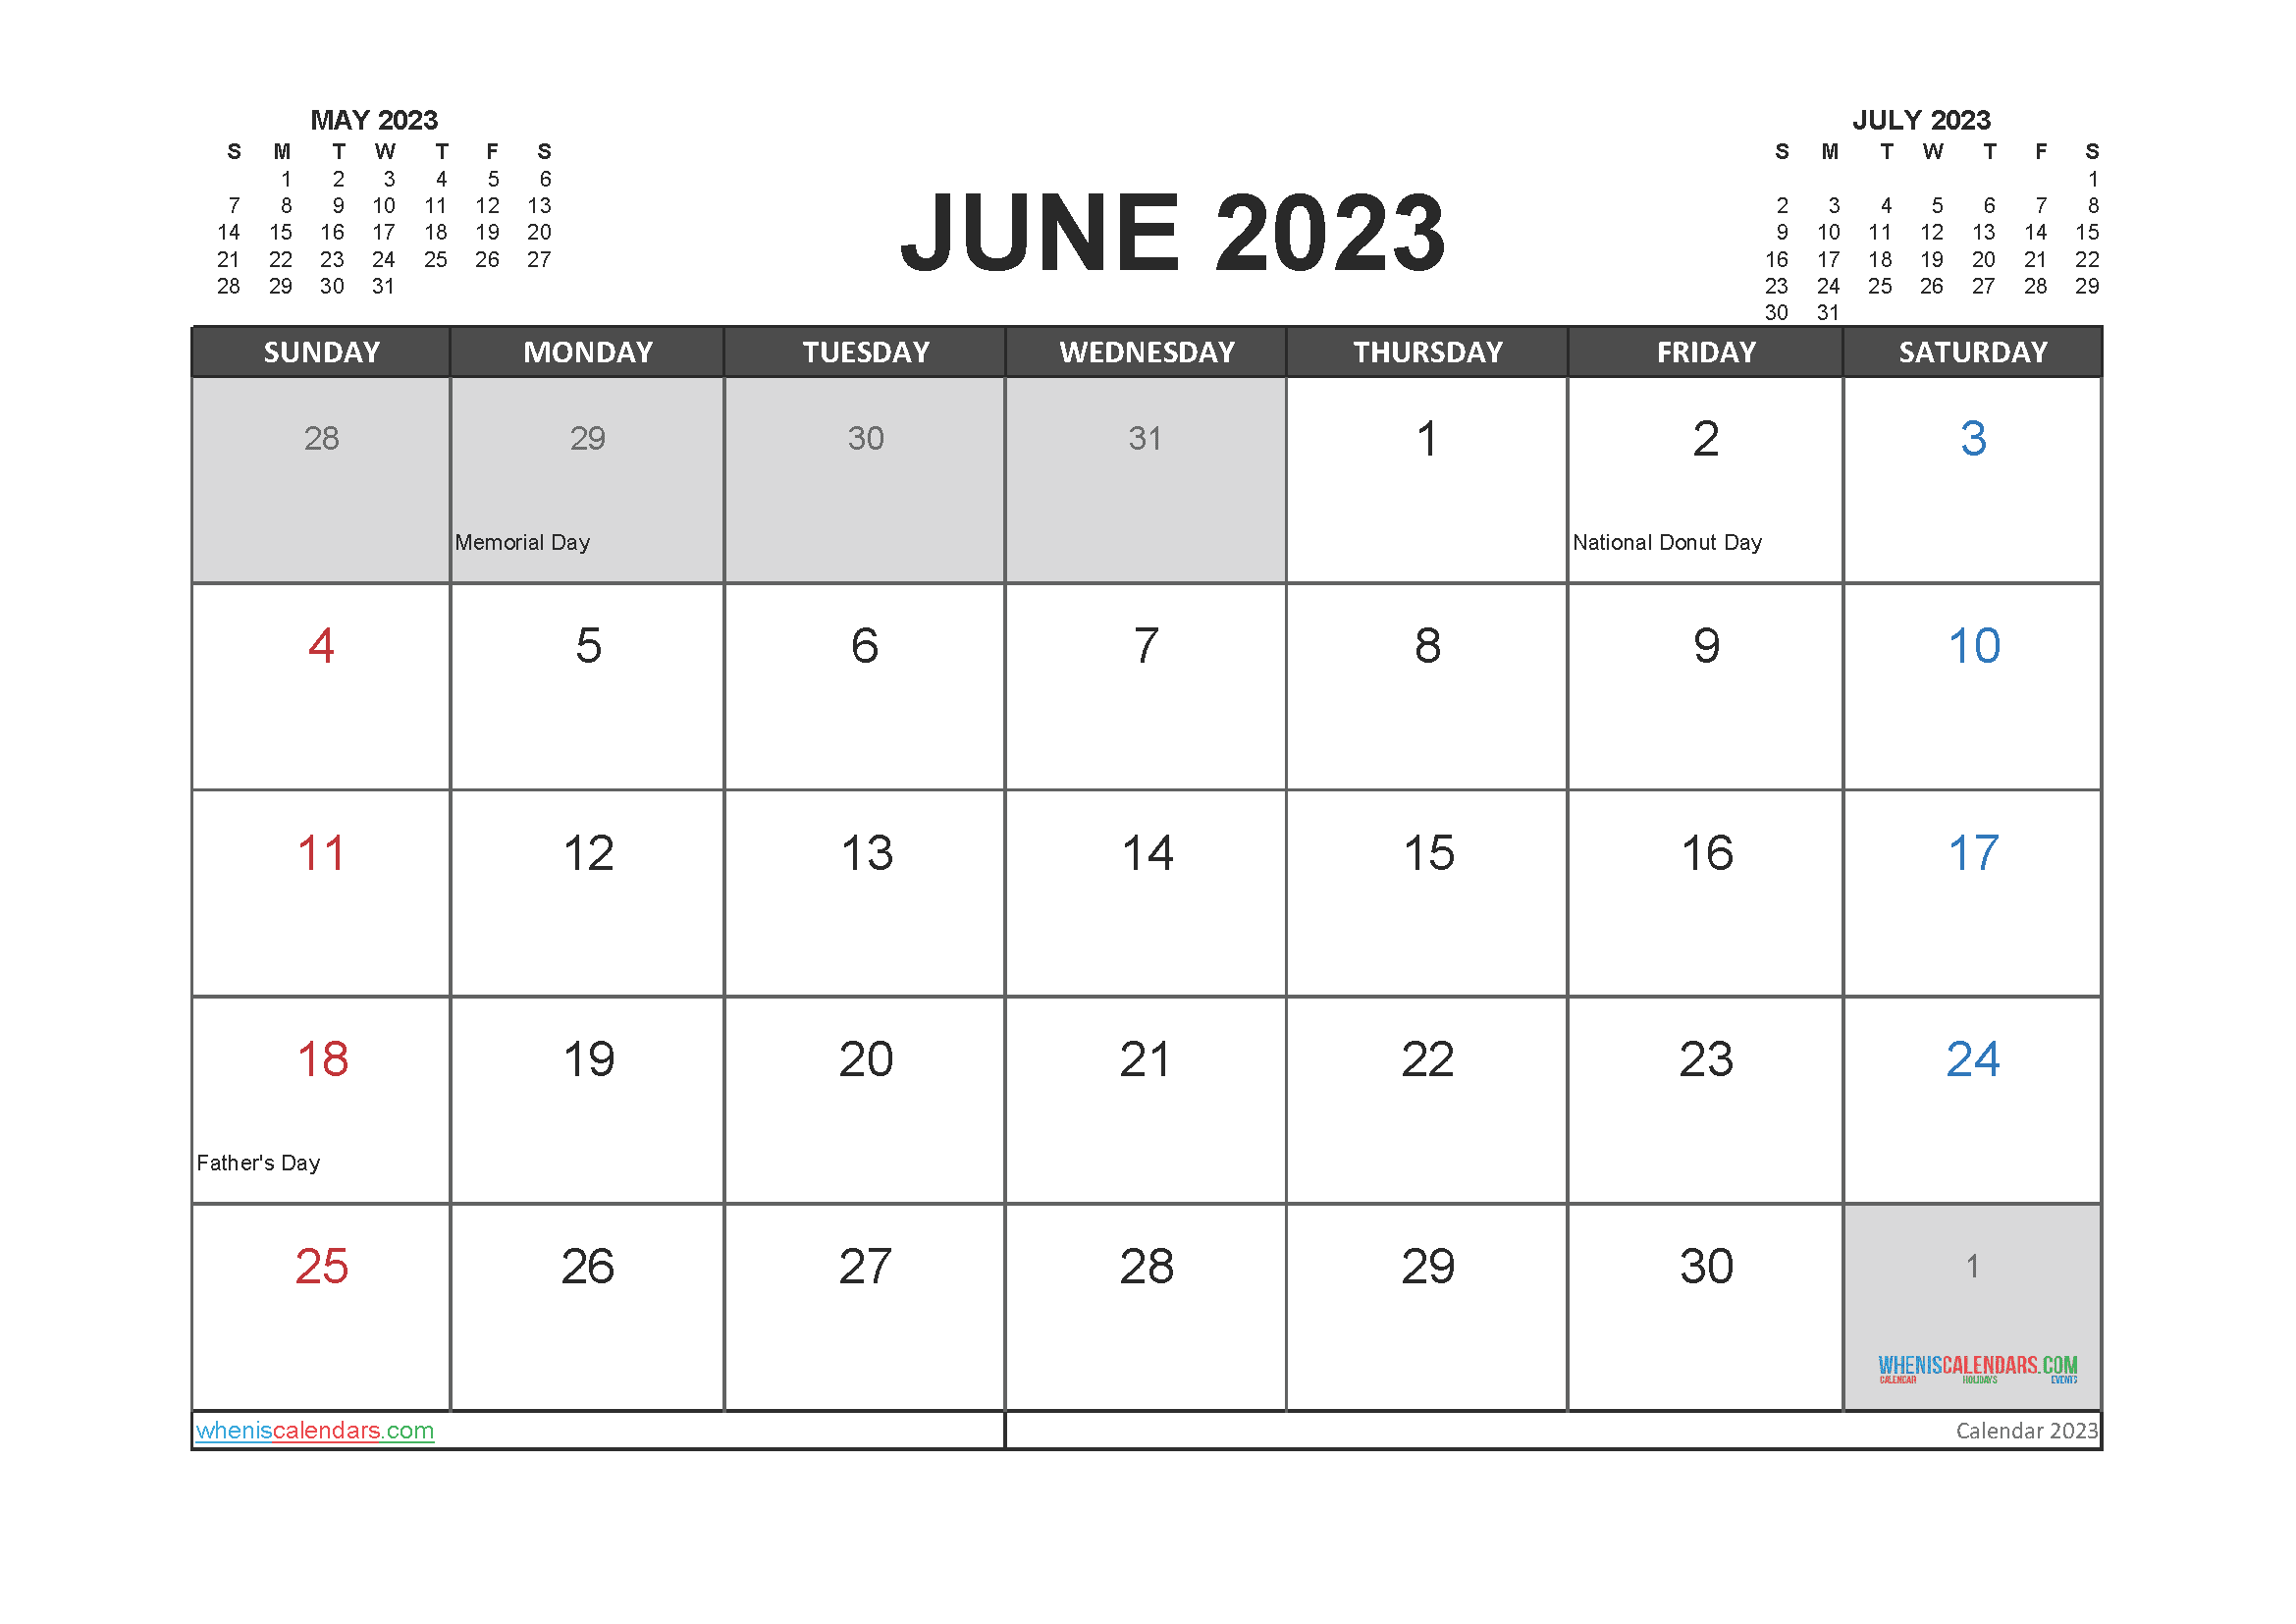 Free Calendar 2023 June with Holidays PDF in Landscape